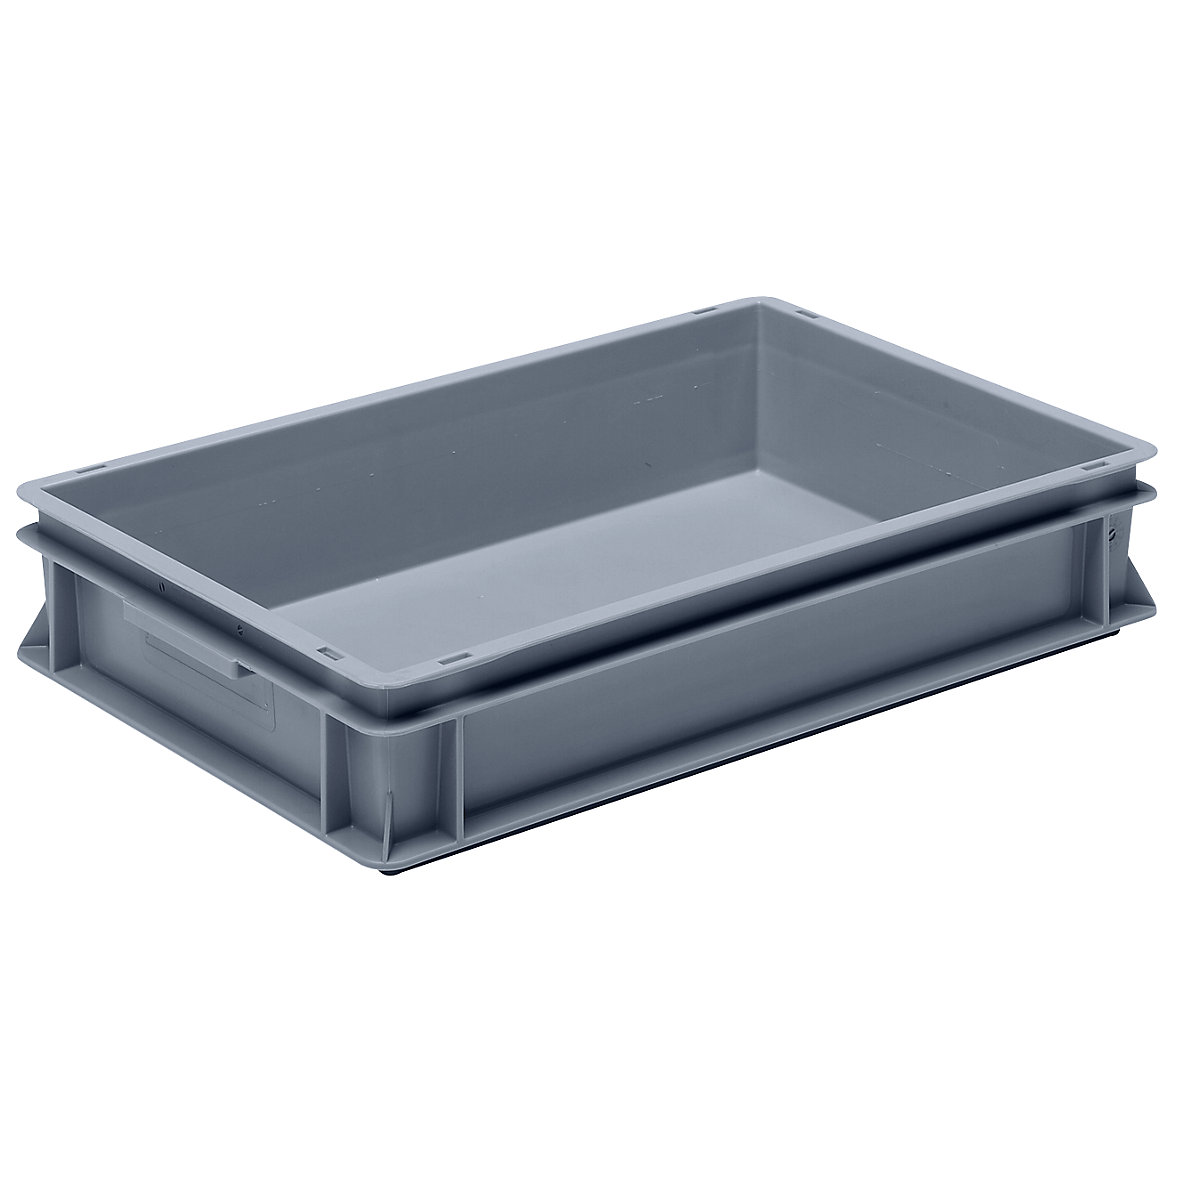 Euro stacking container made of polypropylene (PP), max. load 20 kg, silver grey, capacity 20 l, external height 120 mm, pack of 4